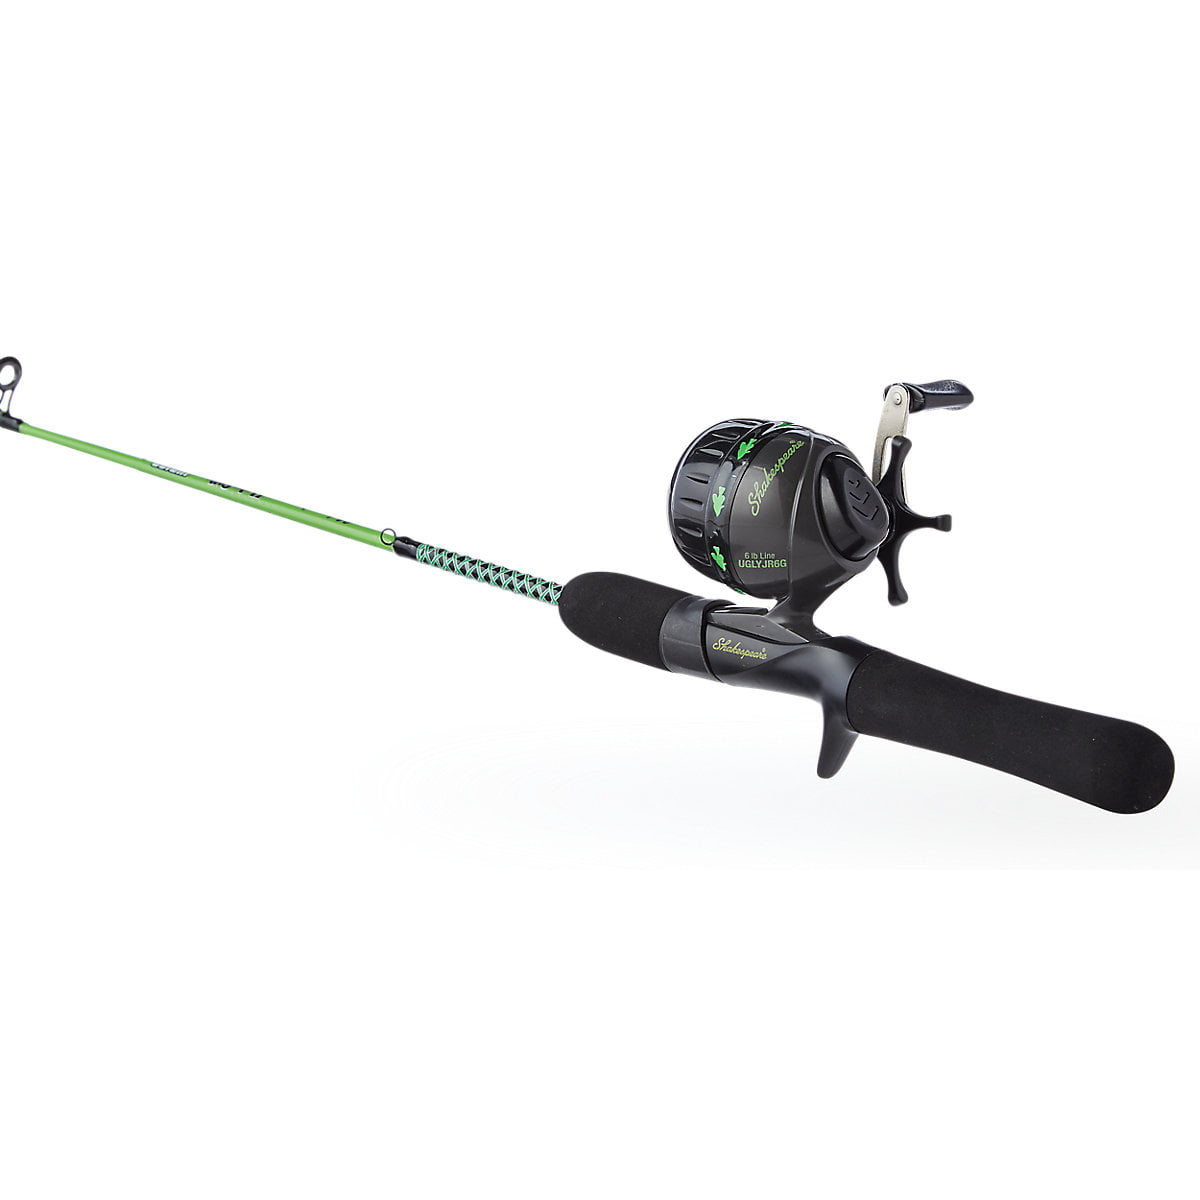 Biddergy - Worldwide Online Auction and Liquidation Services - Shakesphere  Ugly Stik Jr Fishing rod & Zebco Spinning Reel